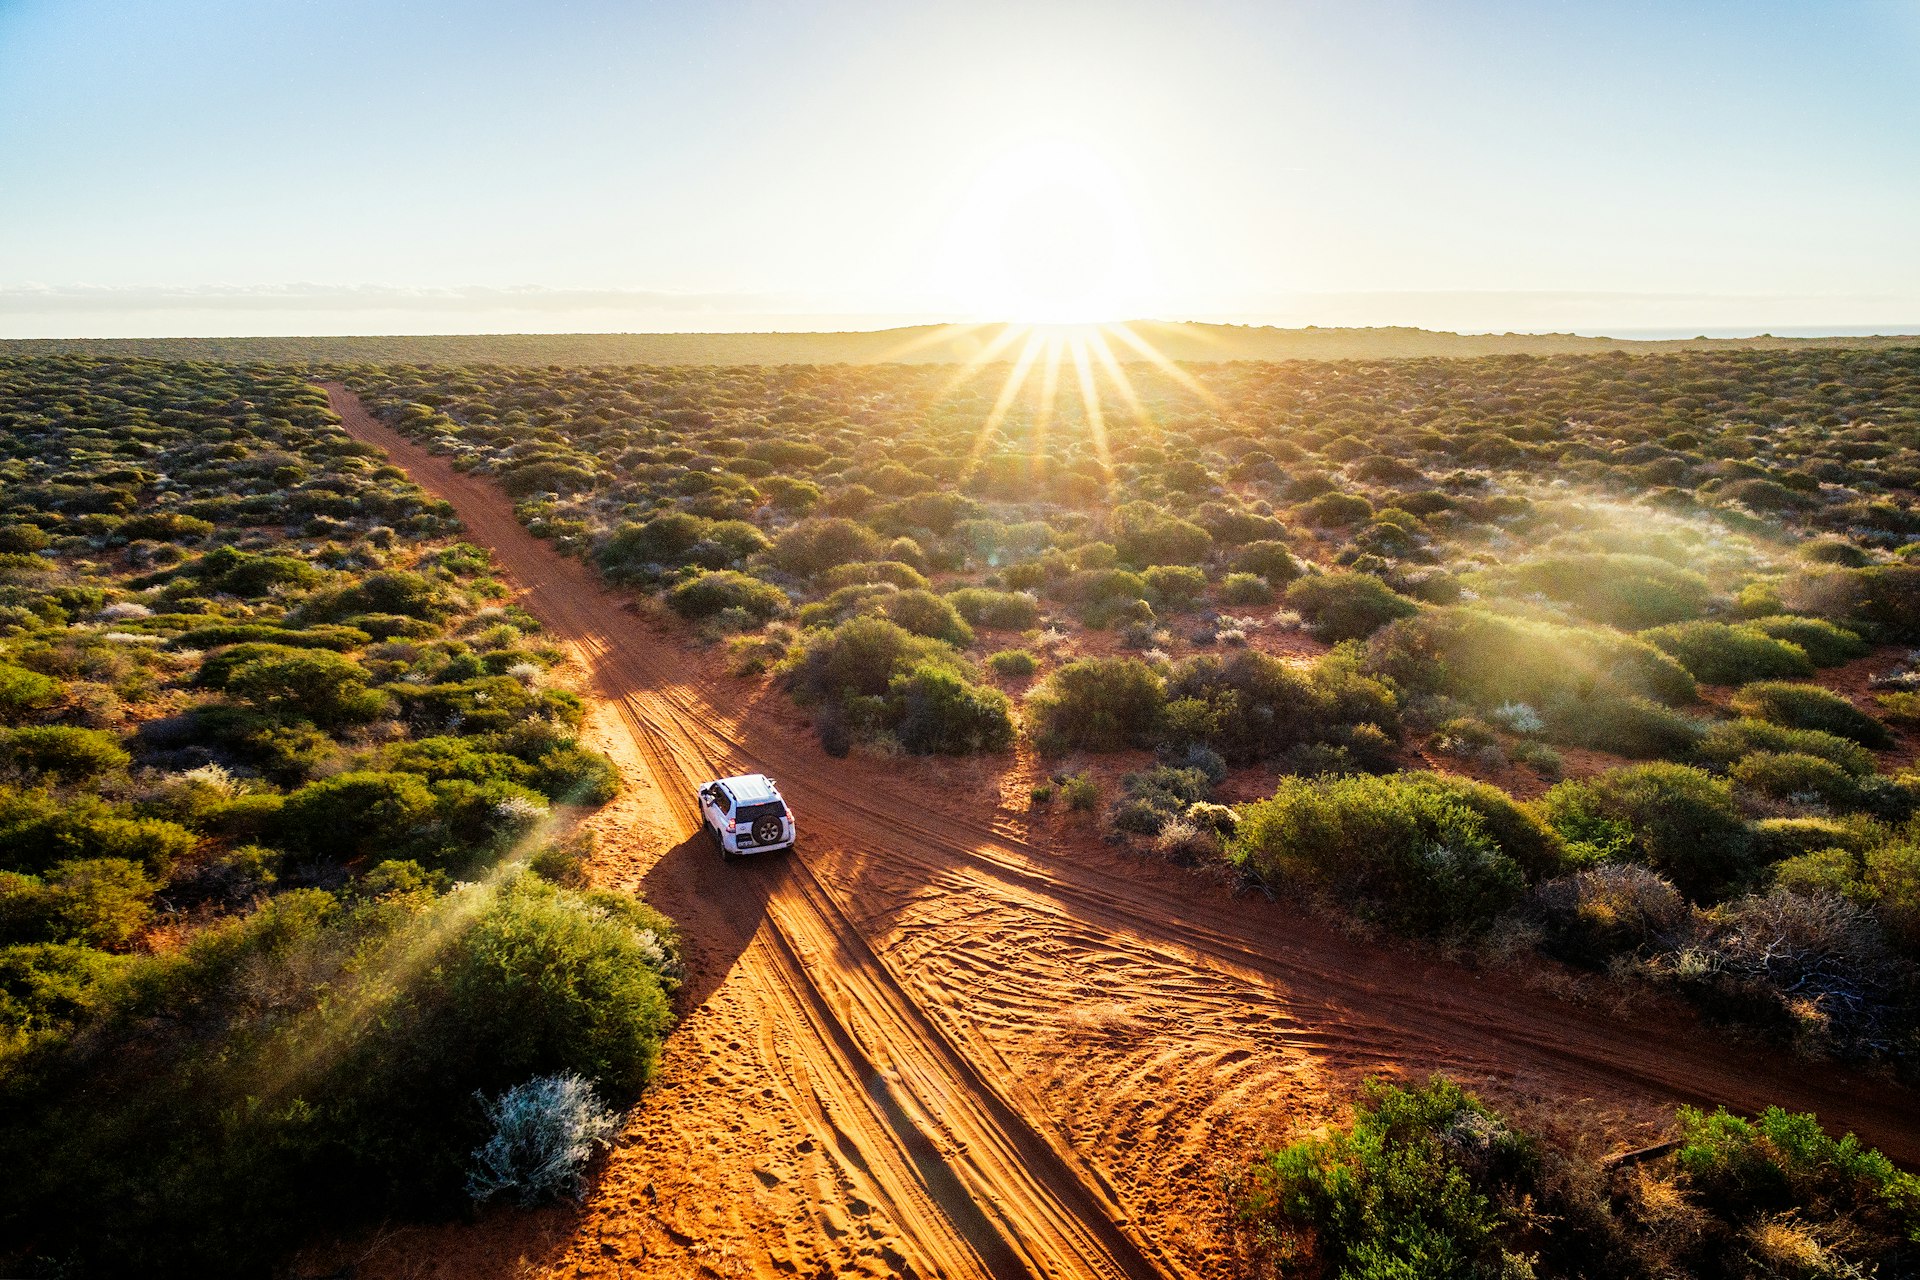 An aerial shot of a white car on a red-dust road heading into the outback